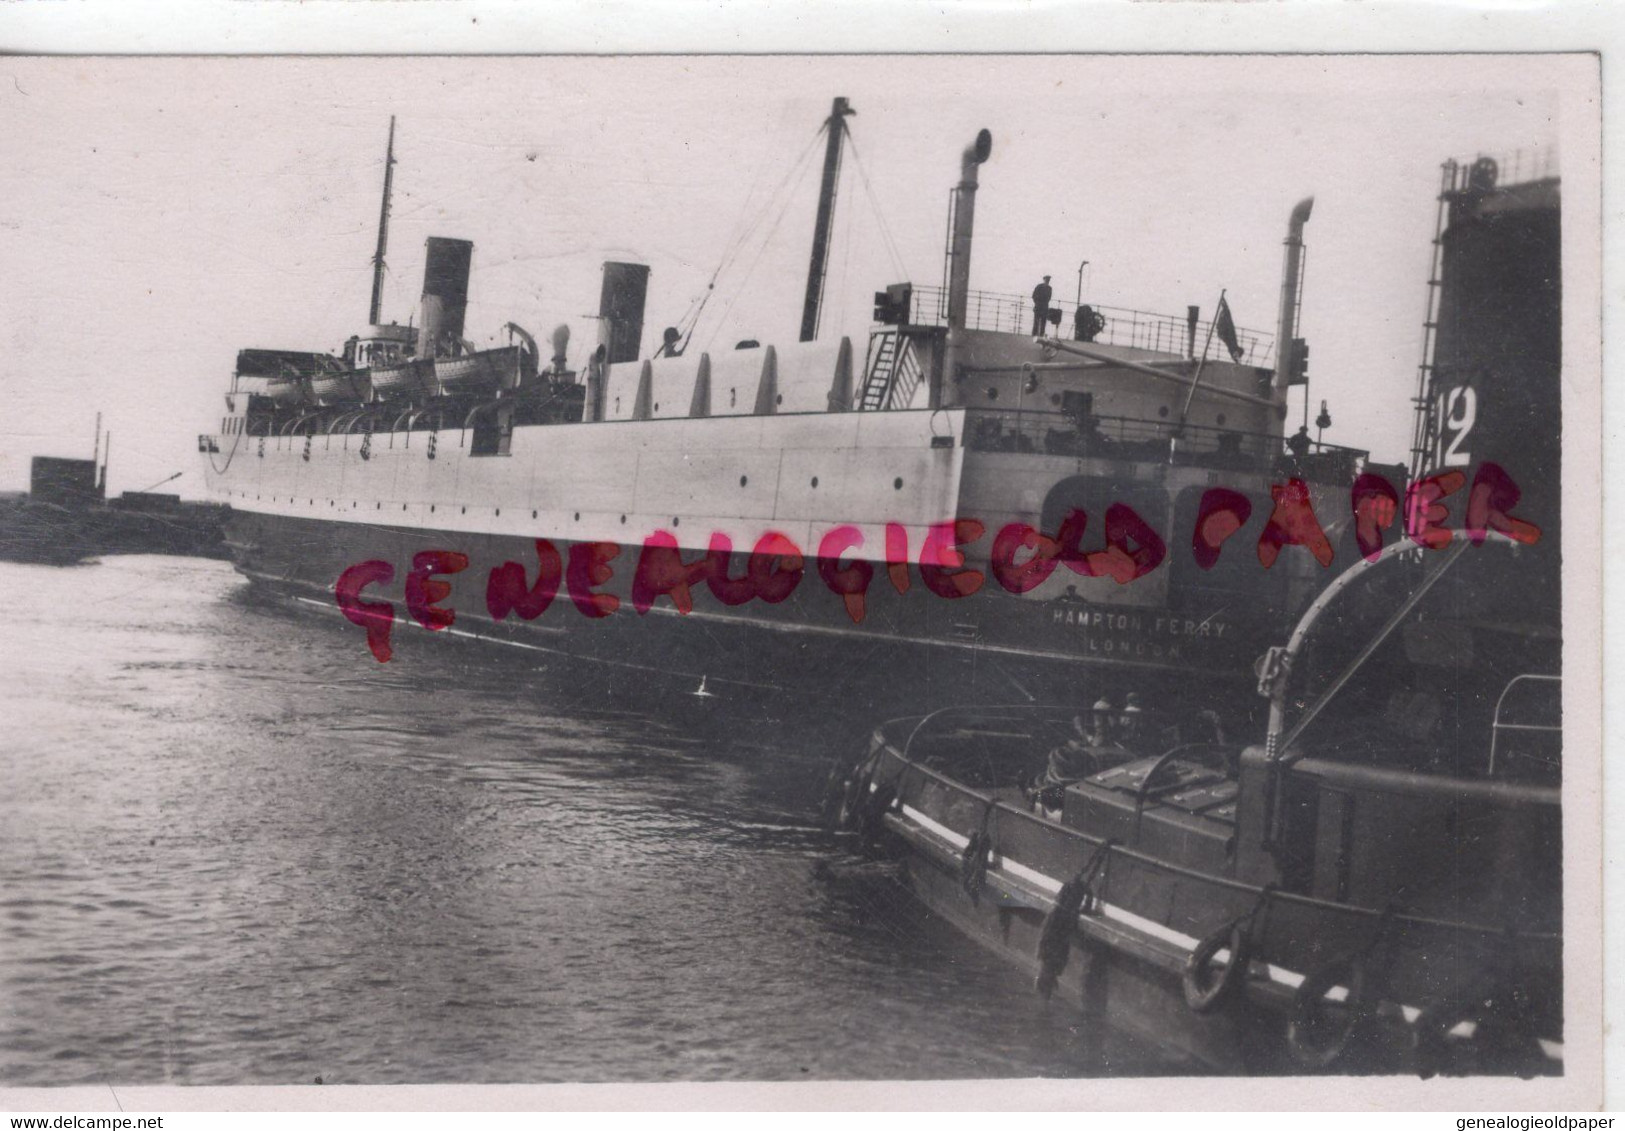 59- DUNKERQUE - MANOEUVRE FERRY BOAT QUITTANT LE PORT -HAMPTON FERRY LONDON - CARTE PHOTO 1949 - Dunkerque